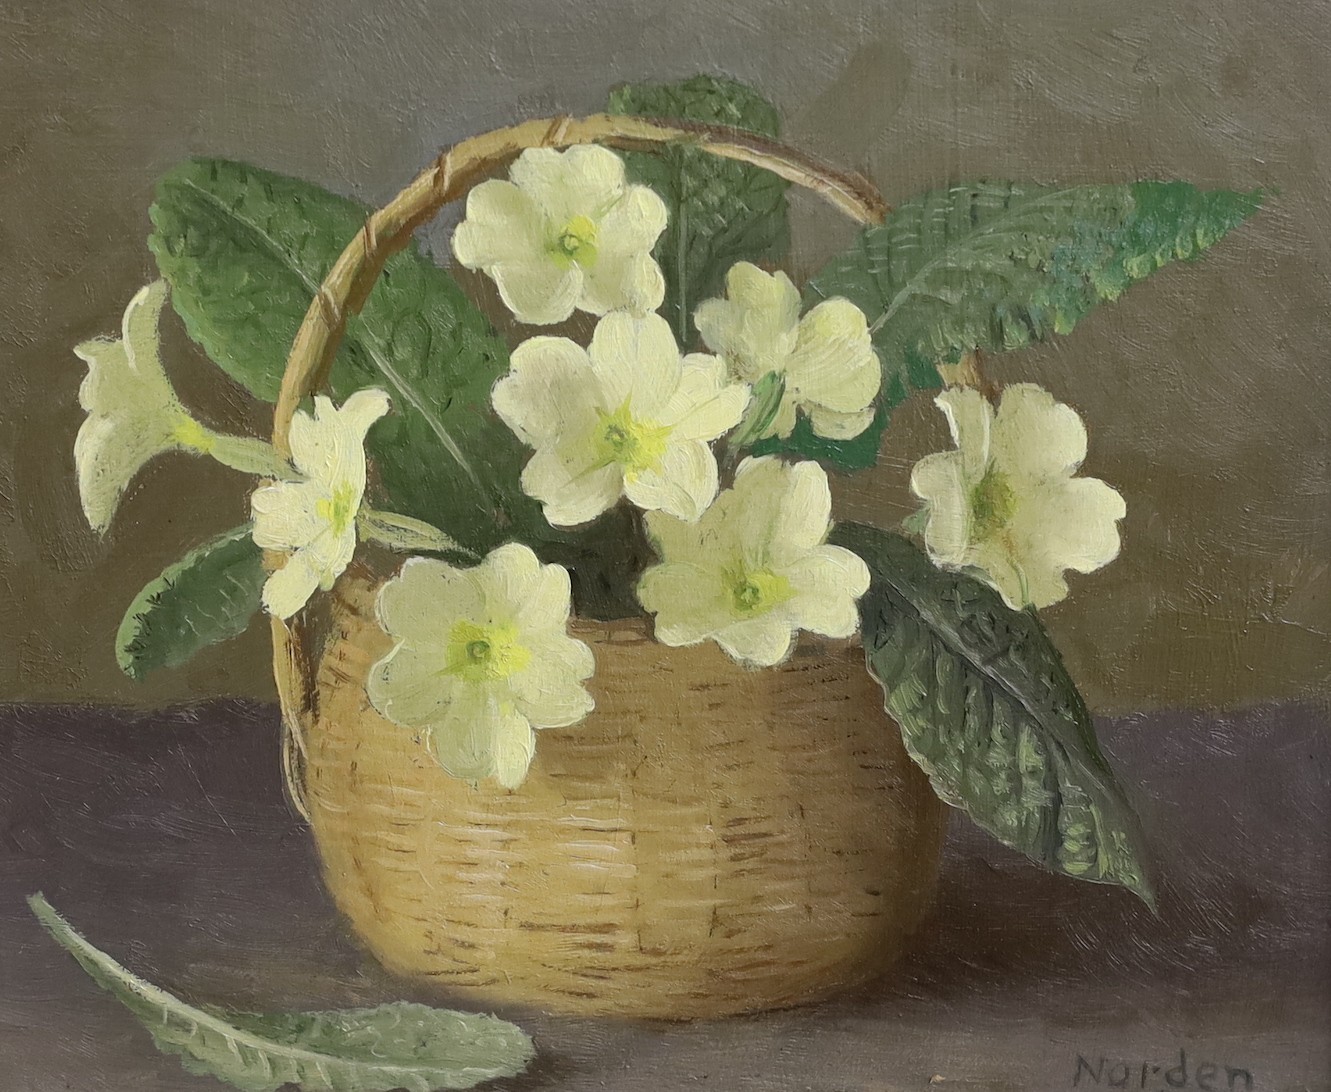 Gerald Norden (1912-2000), oil on board, Primroses in a basket, signed and dated '84, 14 x 16cm